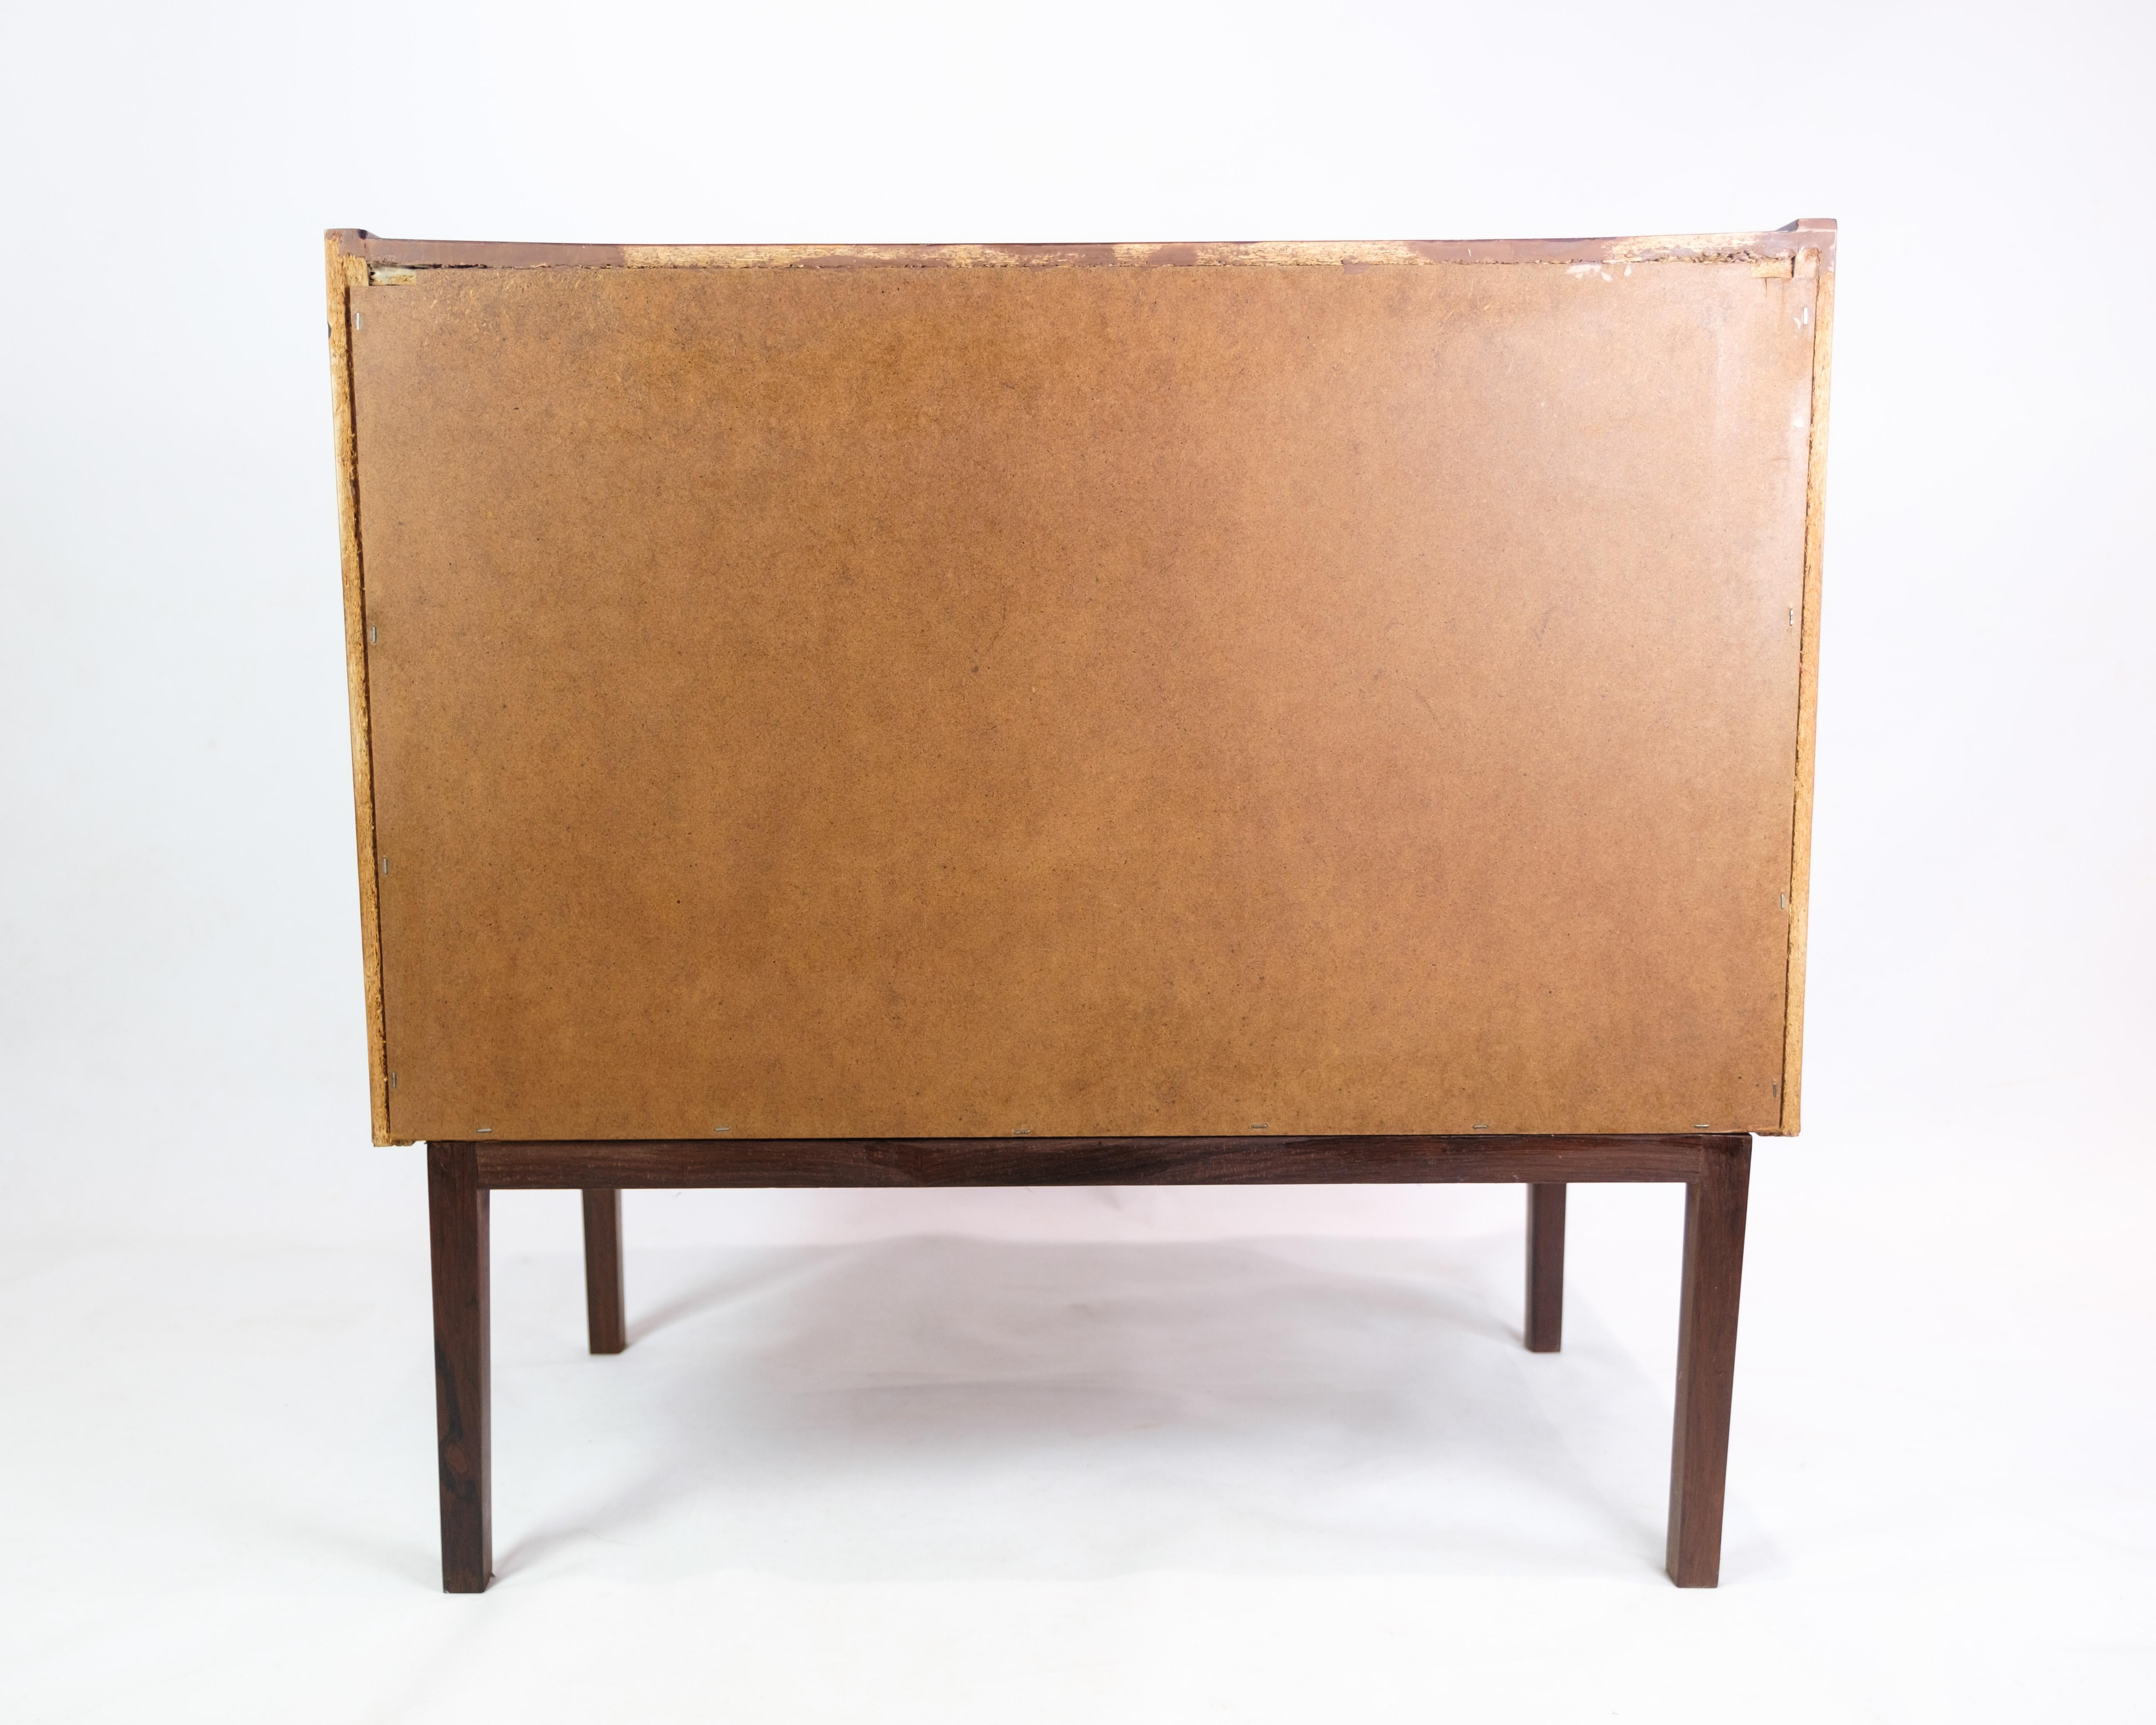 Sideboard With Shelves Made In Rosewood, Danish Design From 1960s For Sale 5